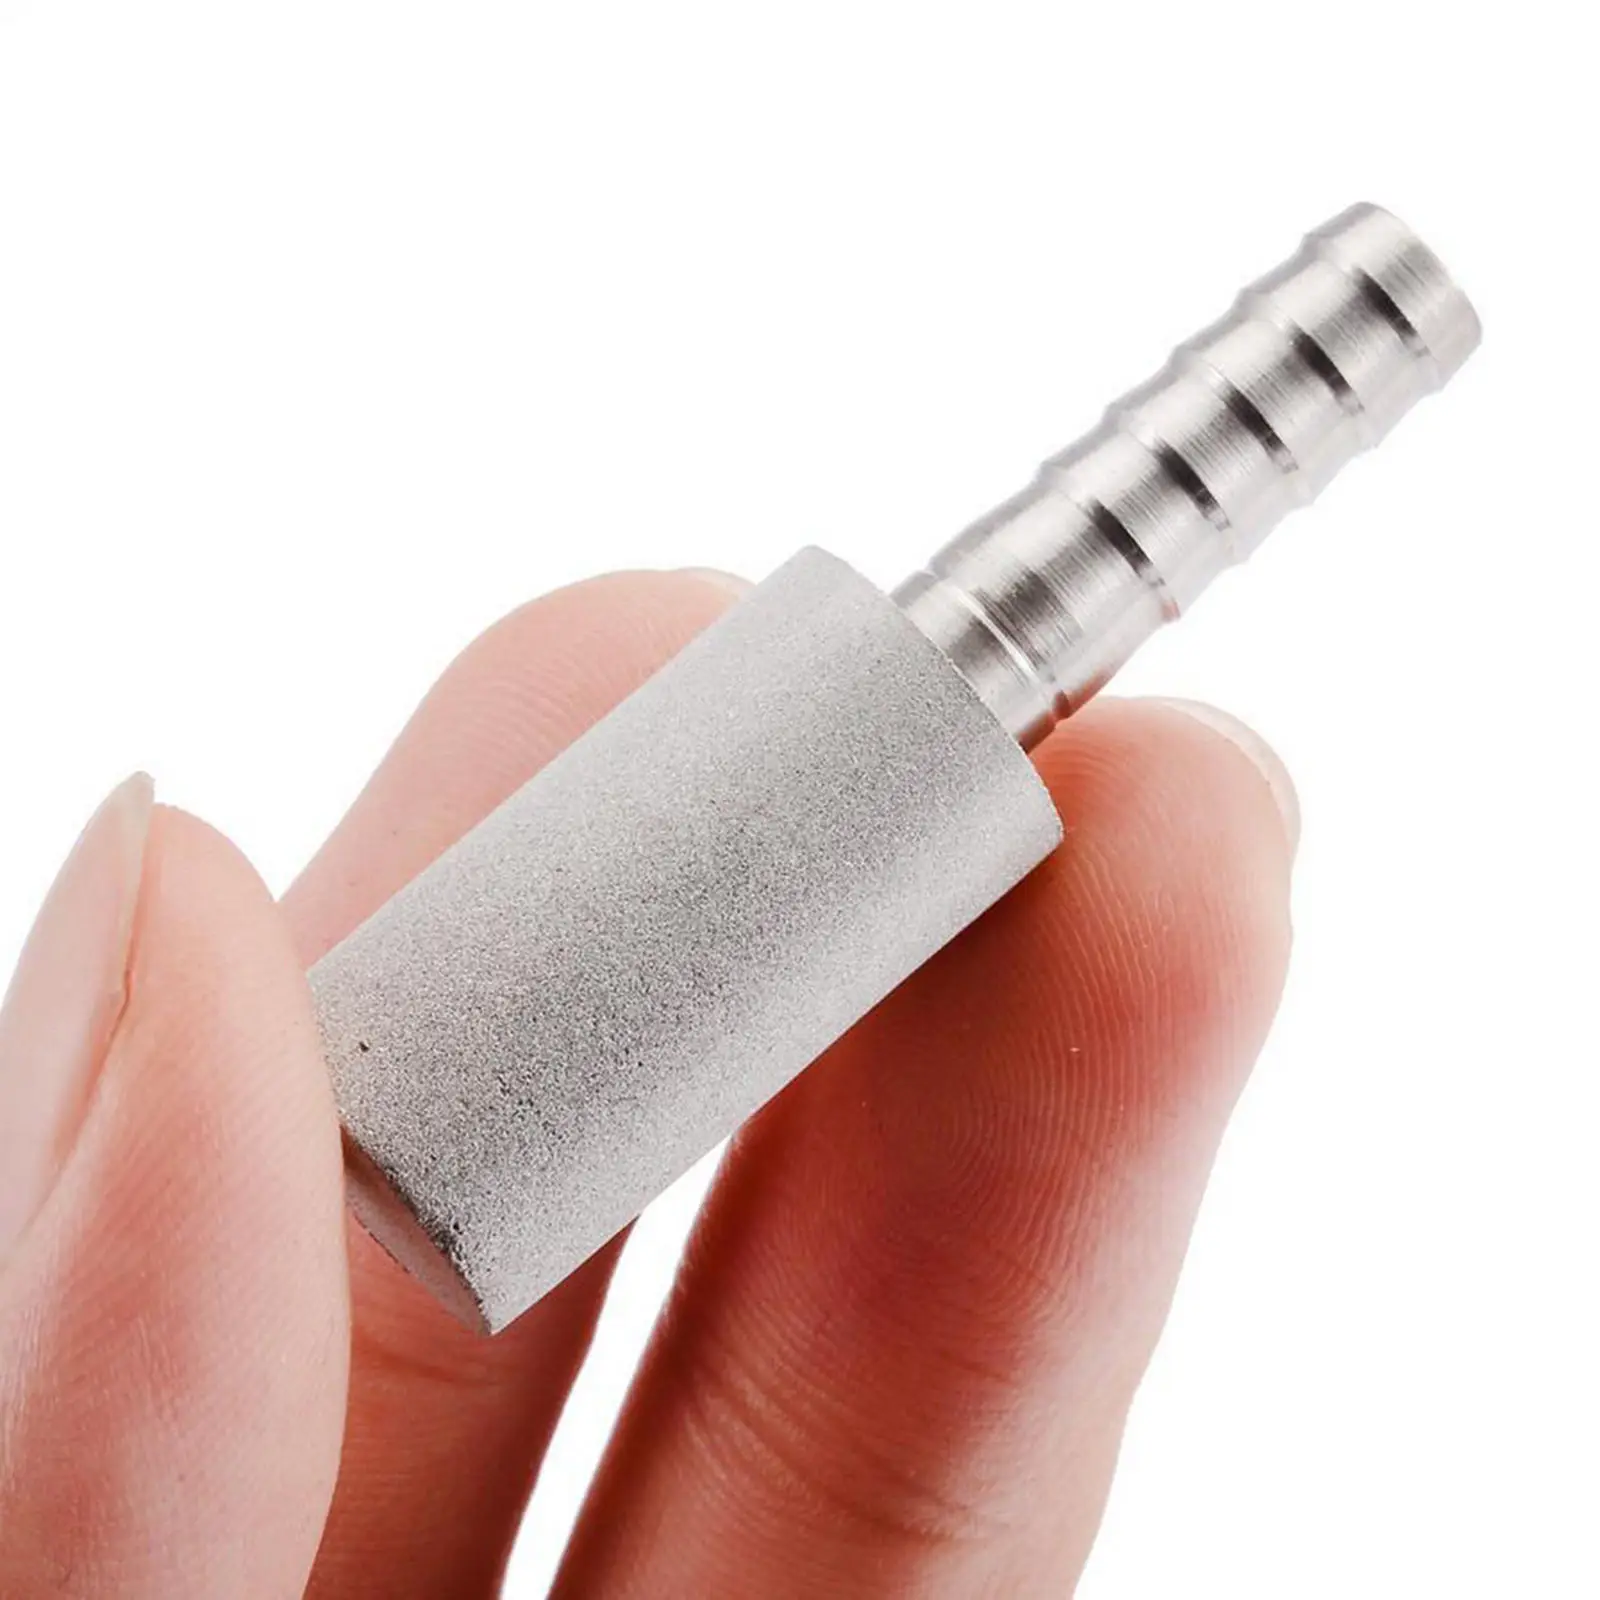 0.5 and 2 Micron Stainless Steel Beer Wine Fitting Carbonating Diffusion Aeration Air Stone for Homebrew Beer